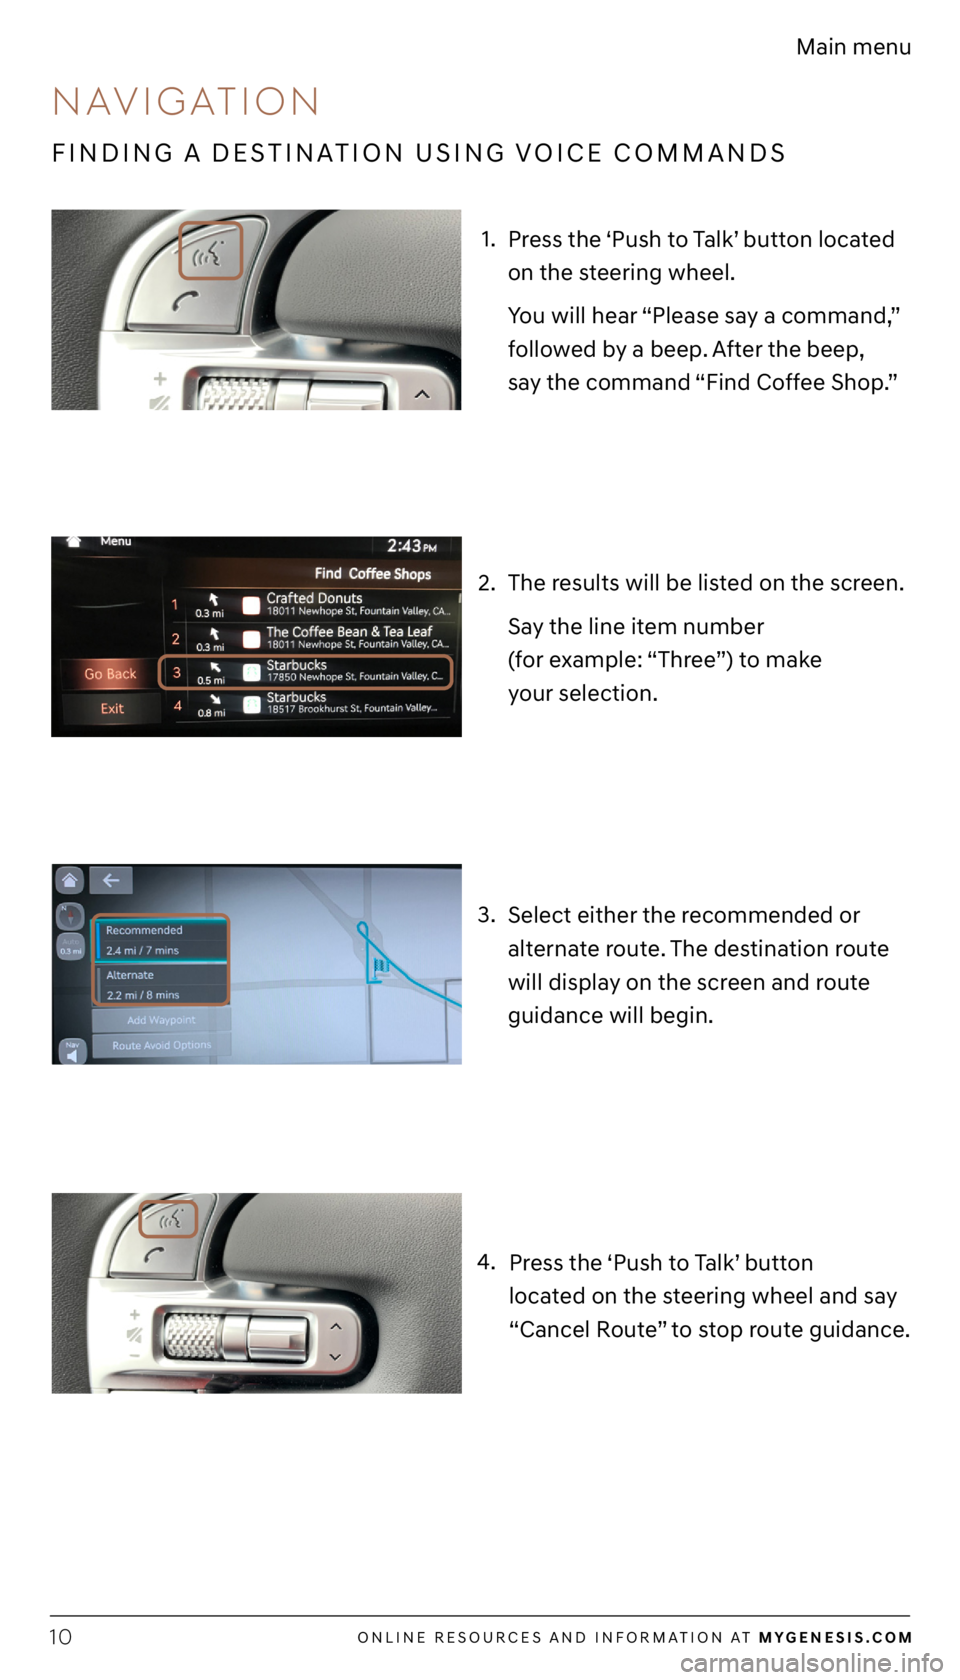 GENESIS G80 2021  Getting Started Guide ONLINE RESOURCES AND INFORMATION AT MYGENESIS.COM10
Main menu
1.
4. 3.
Select either the recommended or 
alternate route. The destination route 
will display on the screen and route 
guidance will beg